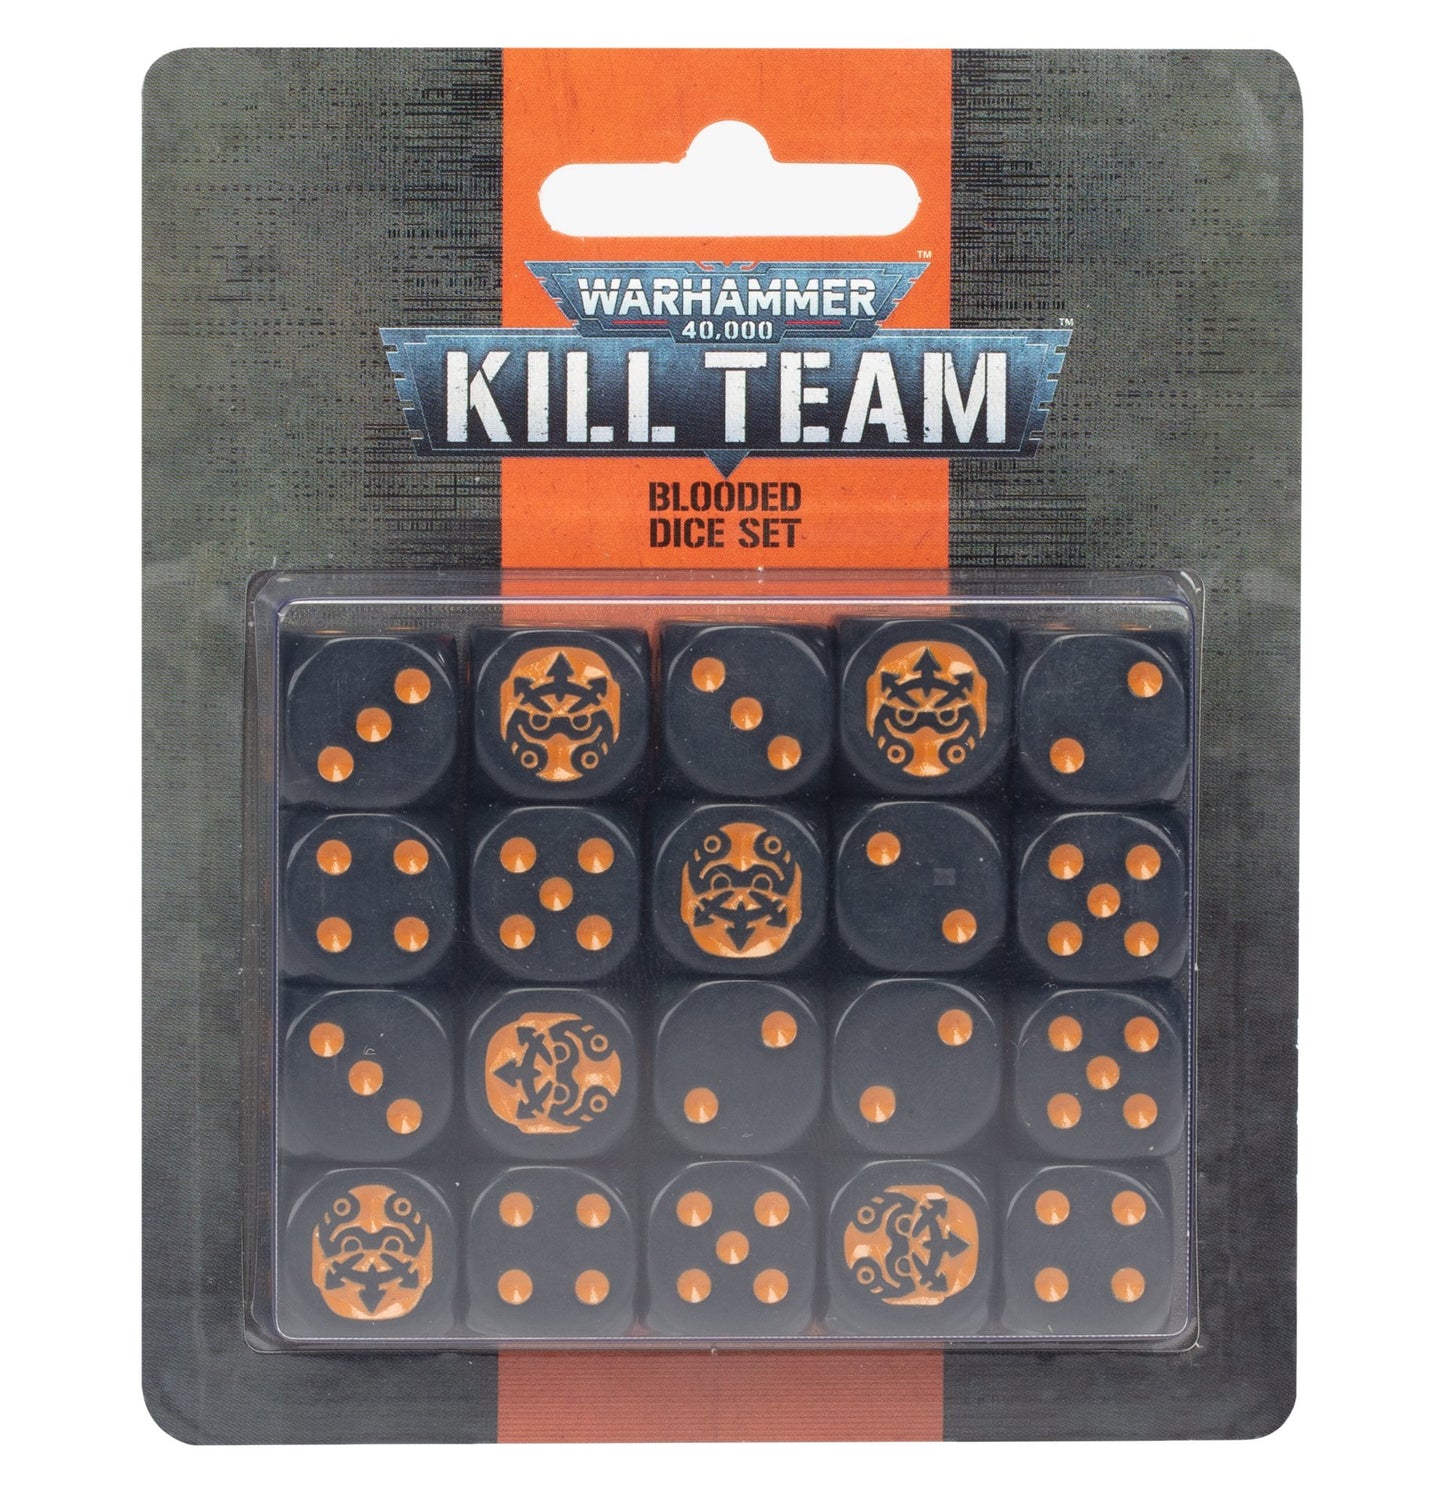 OUT - KILL TEAM: BLOODED DICE